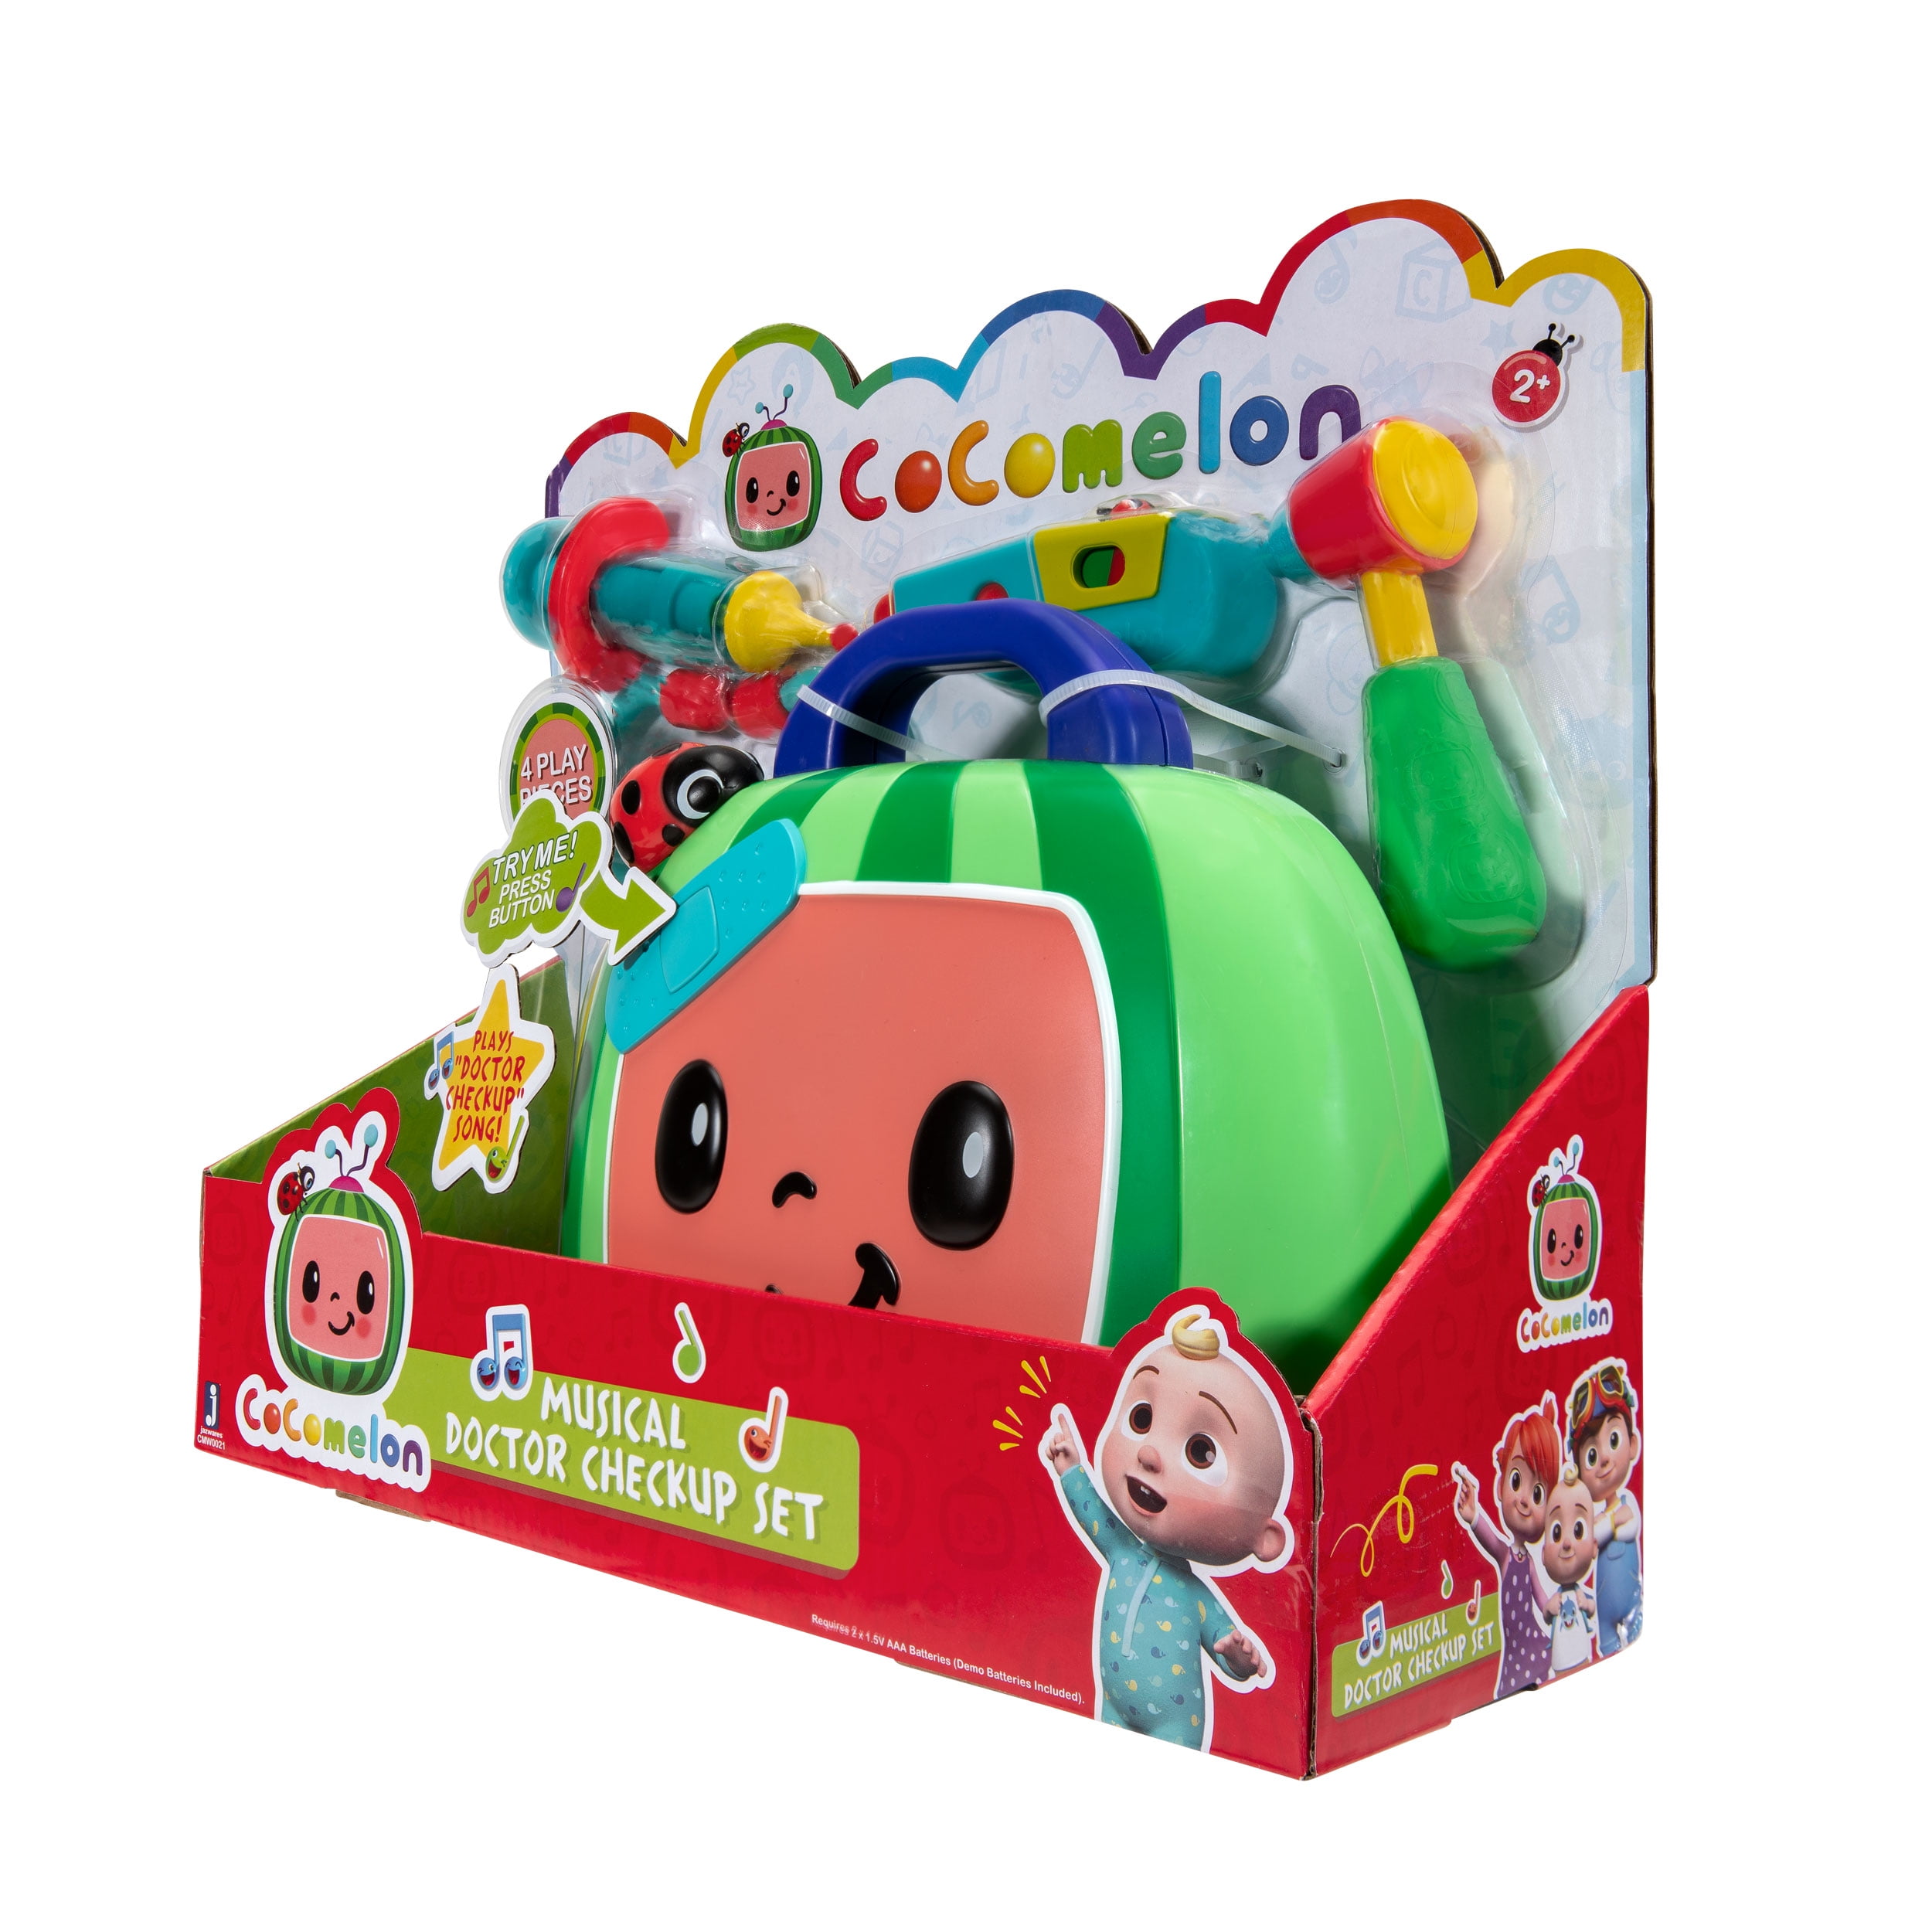 CMW0021 Jazwares Cocomelon Musical Doctor Checkup Play Set for sale online 